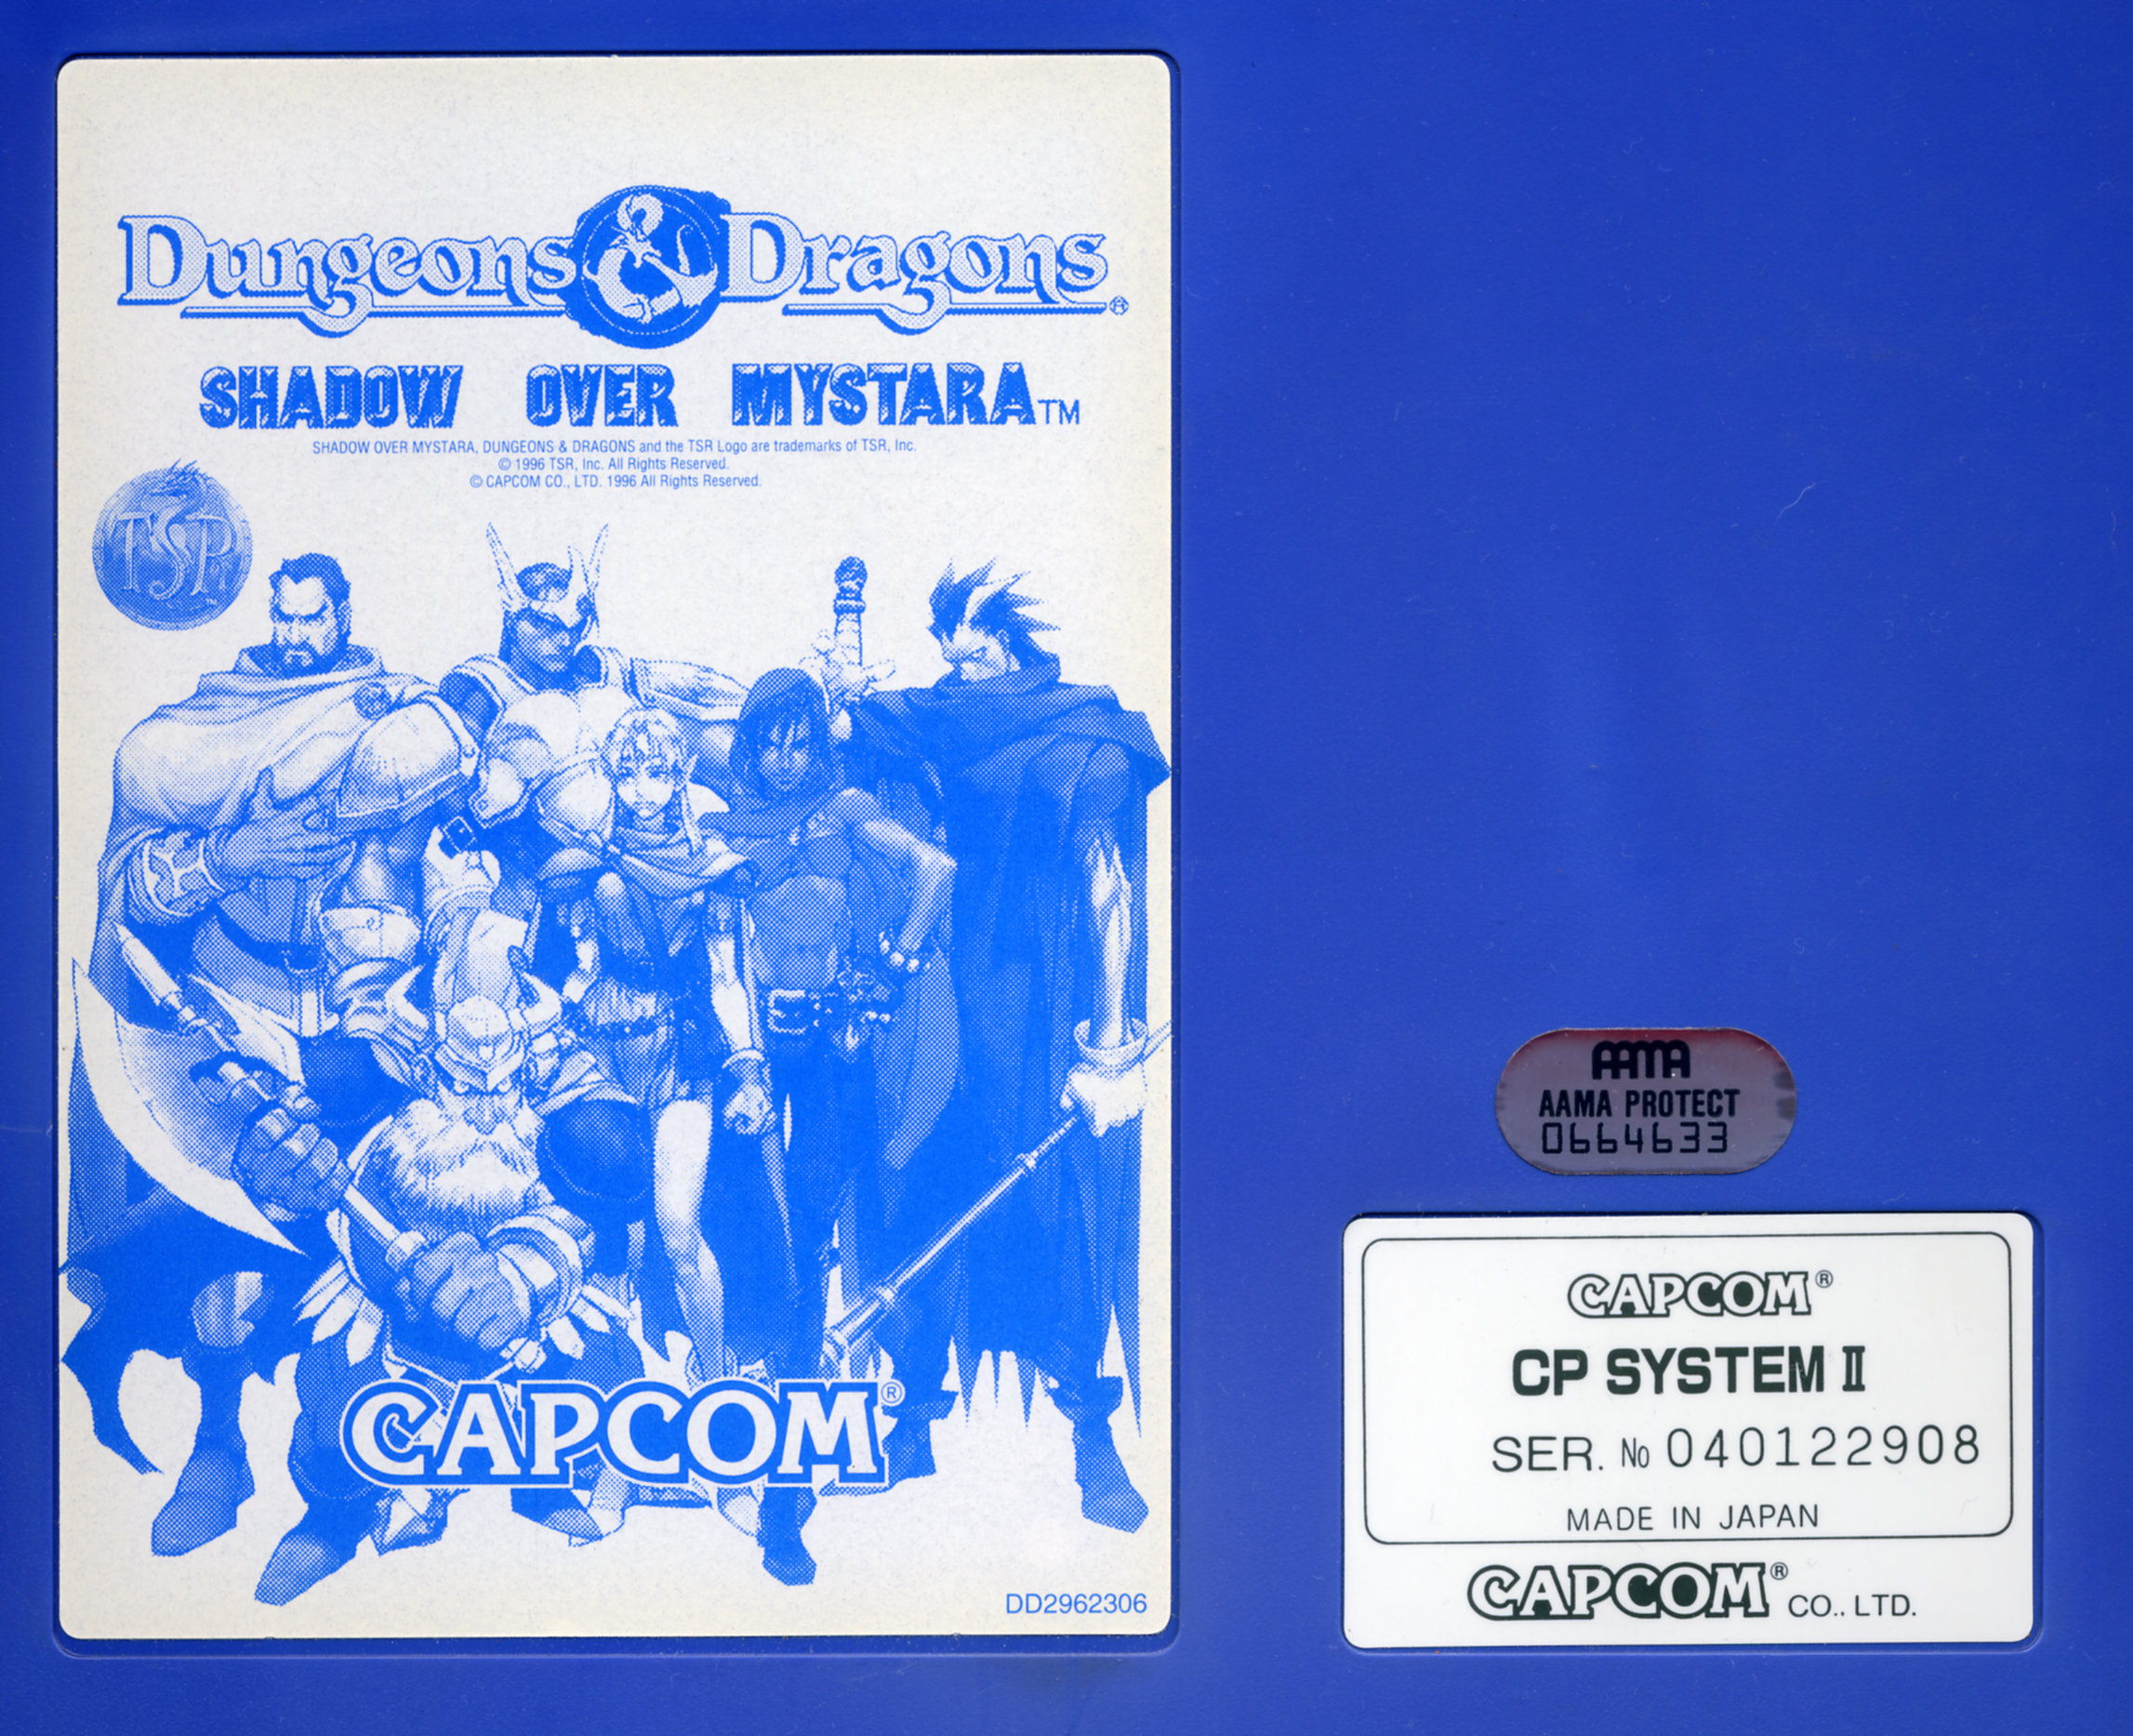 Cps2 dungeons and dragons shadow over mystara english label.jpg